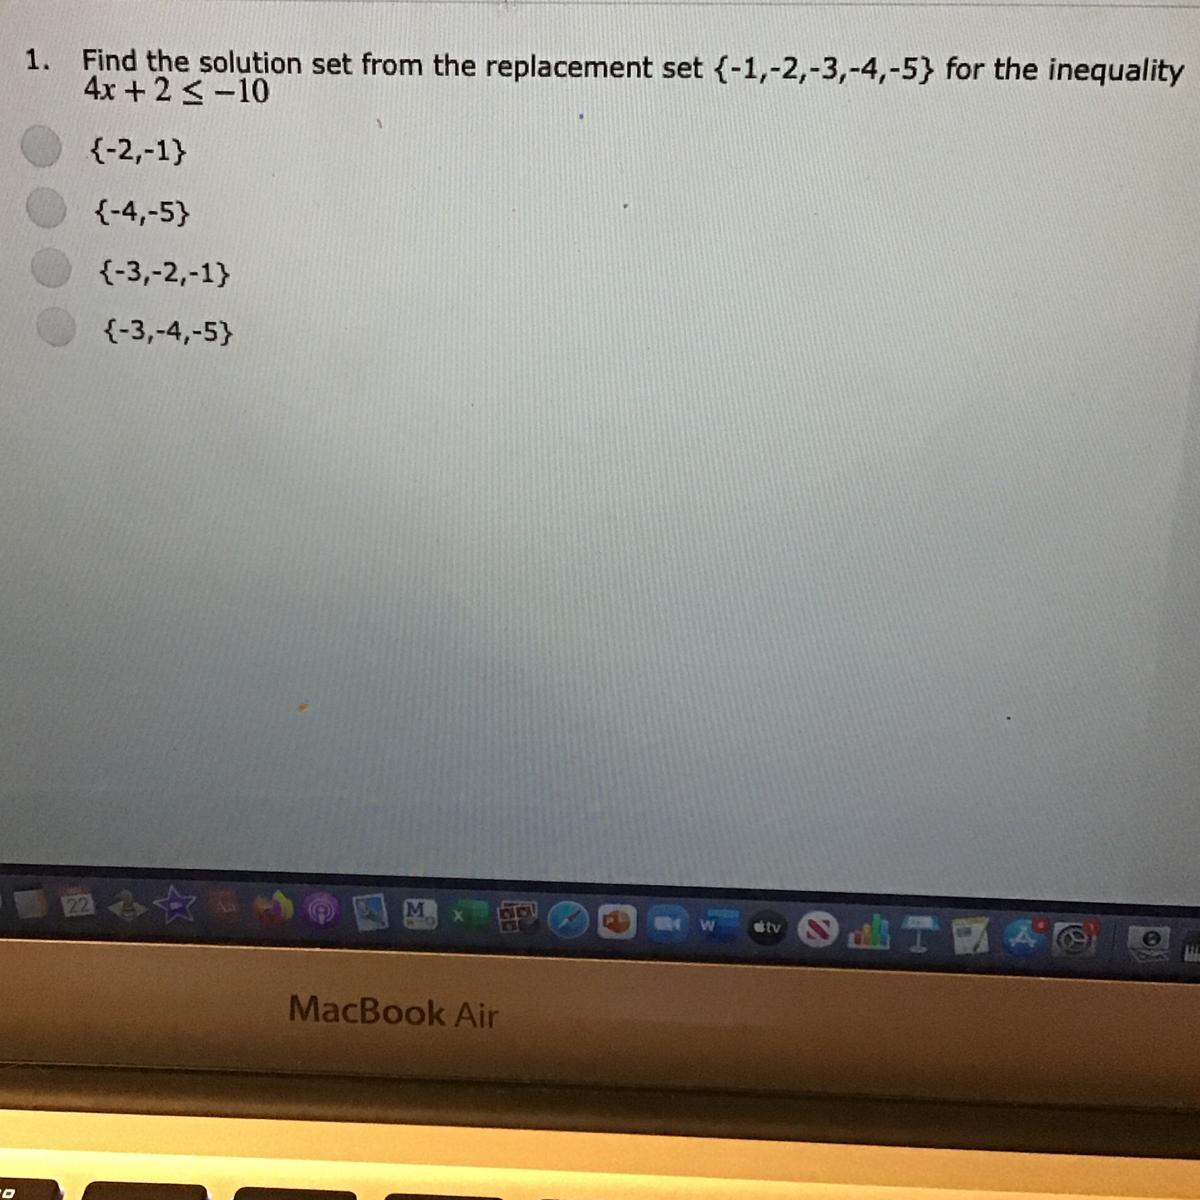 I Cant Download The Answers.